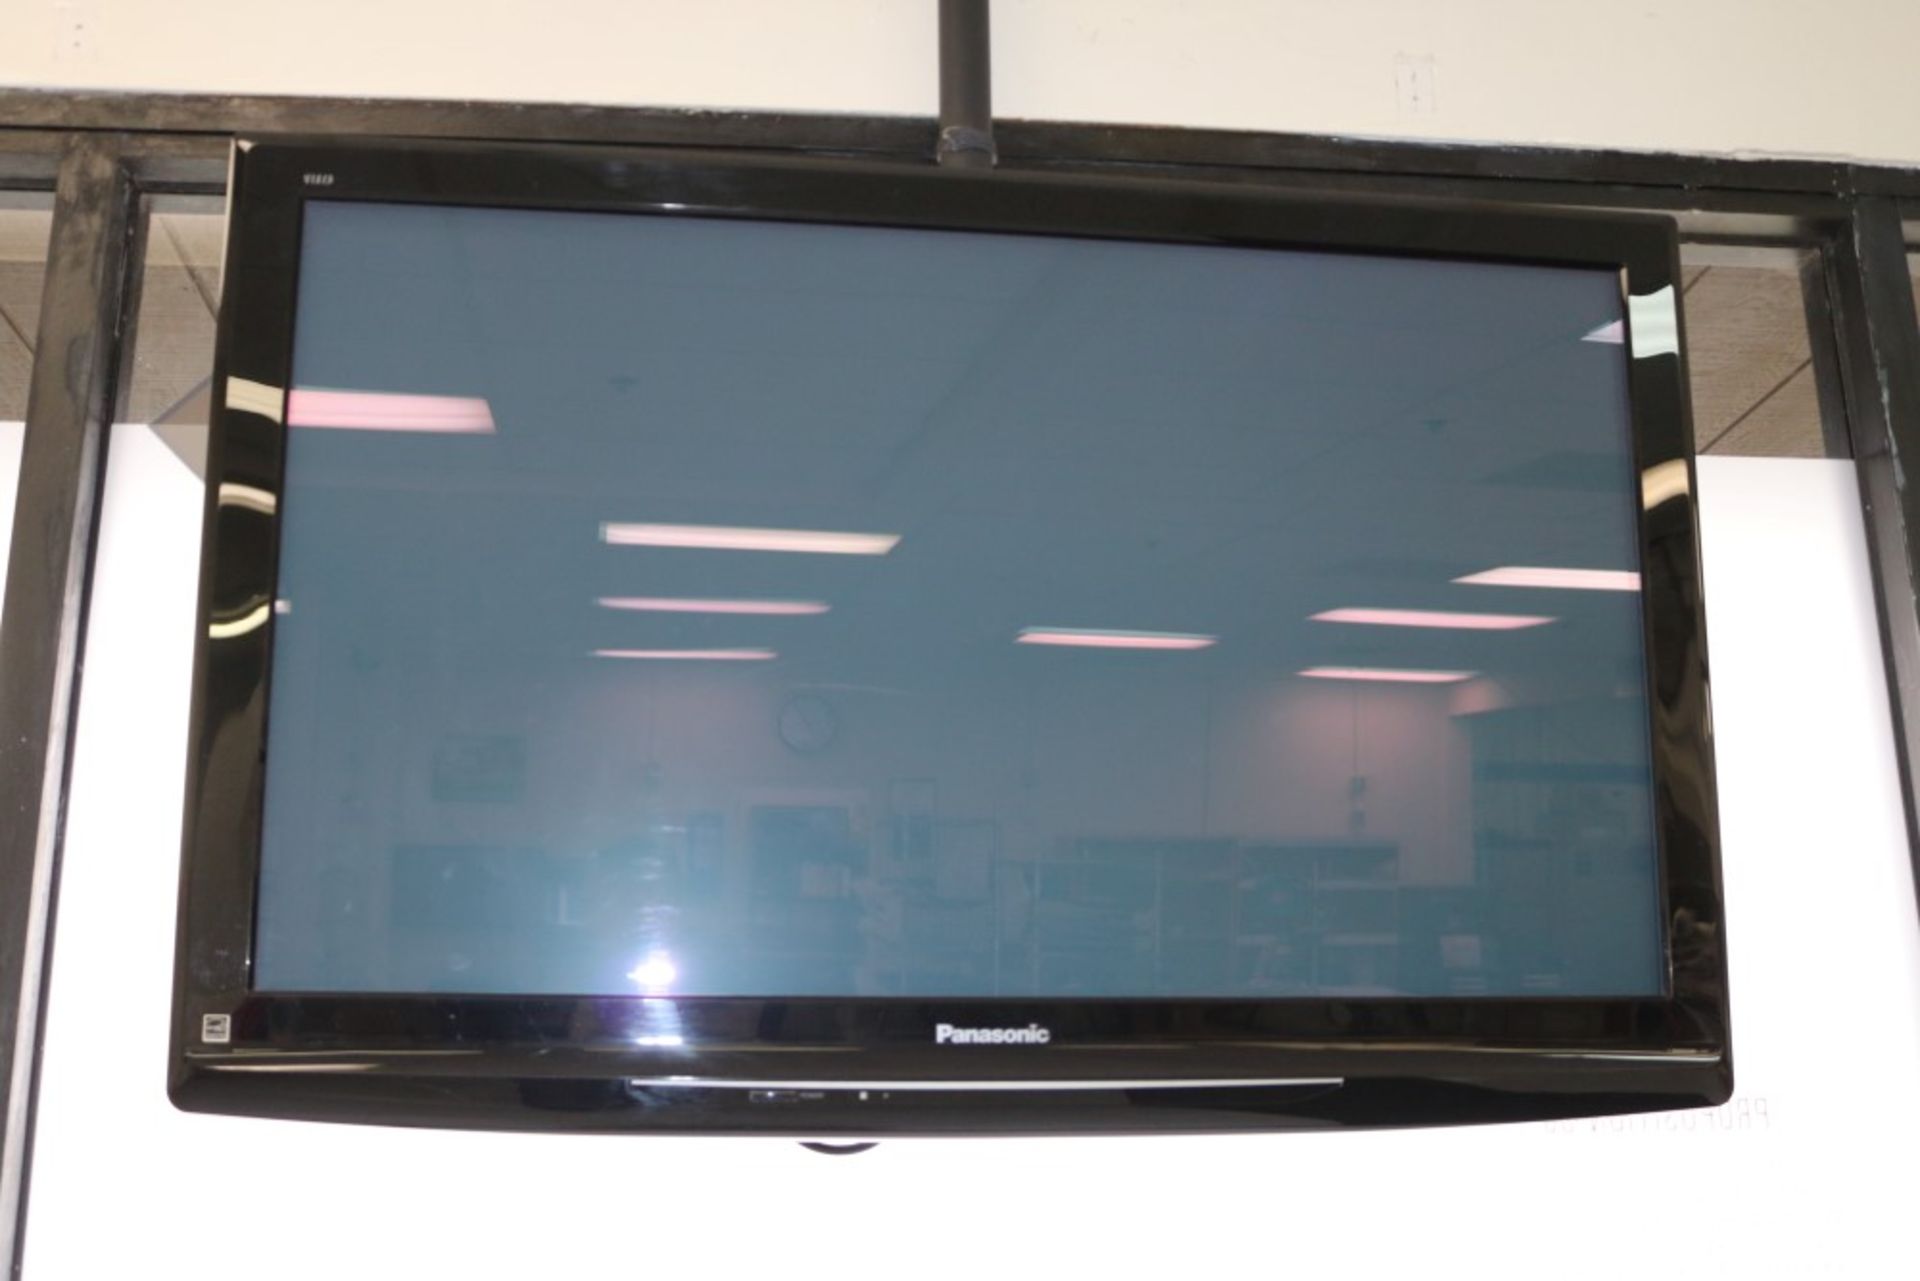 48" Panasonic Viera with Seneca Wifi Casting System and Drop Arm Ceiling Mount - Image 2 of 7